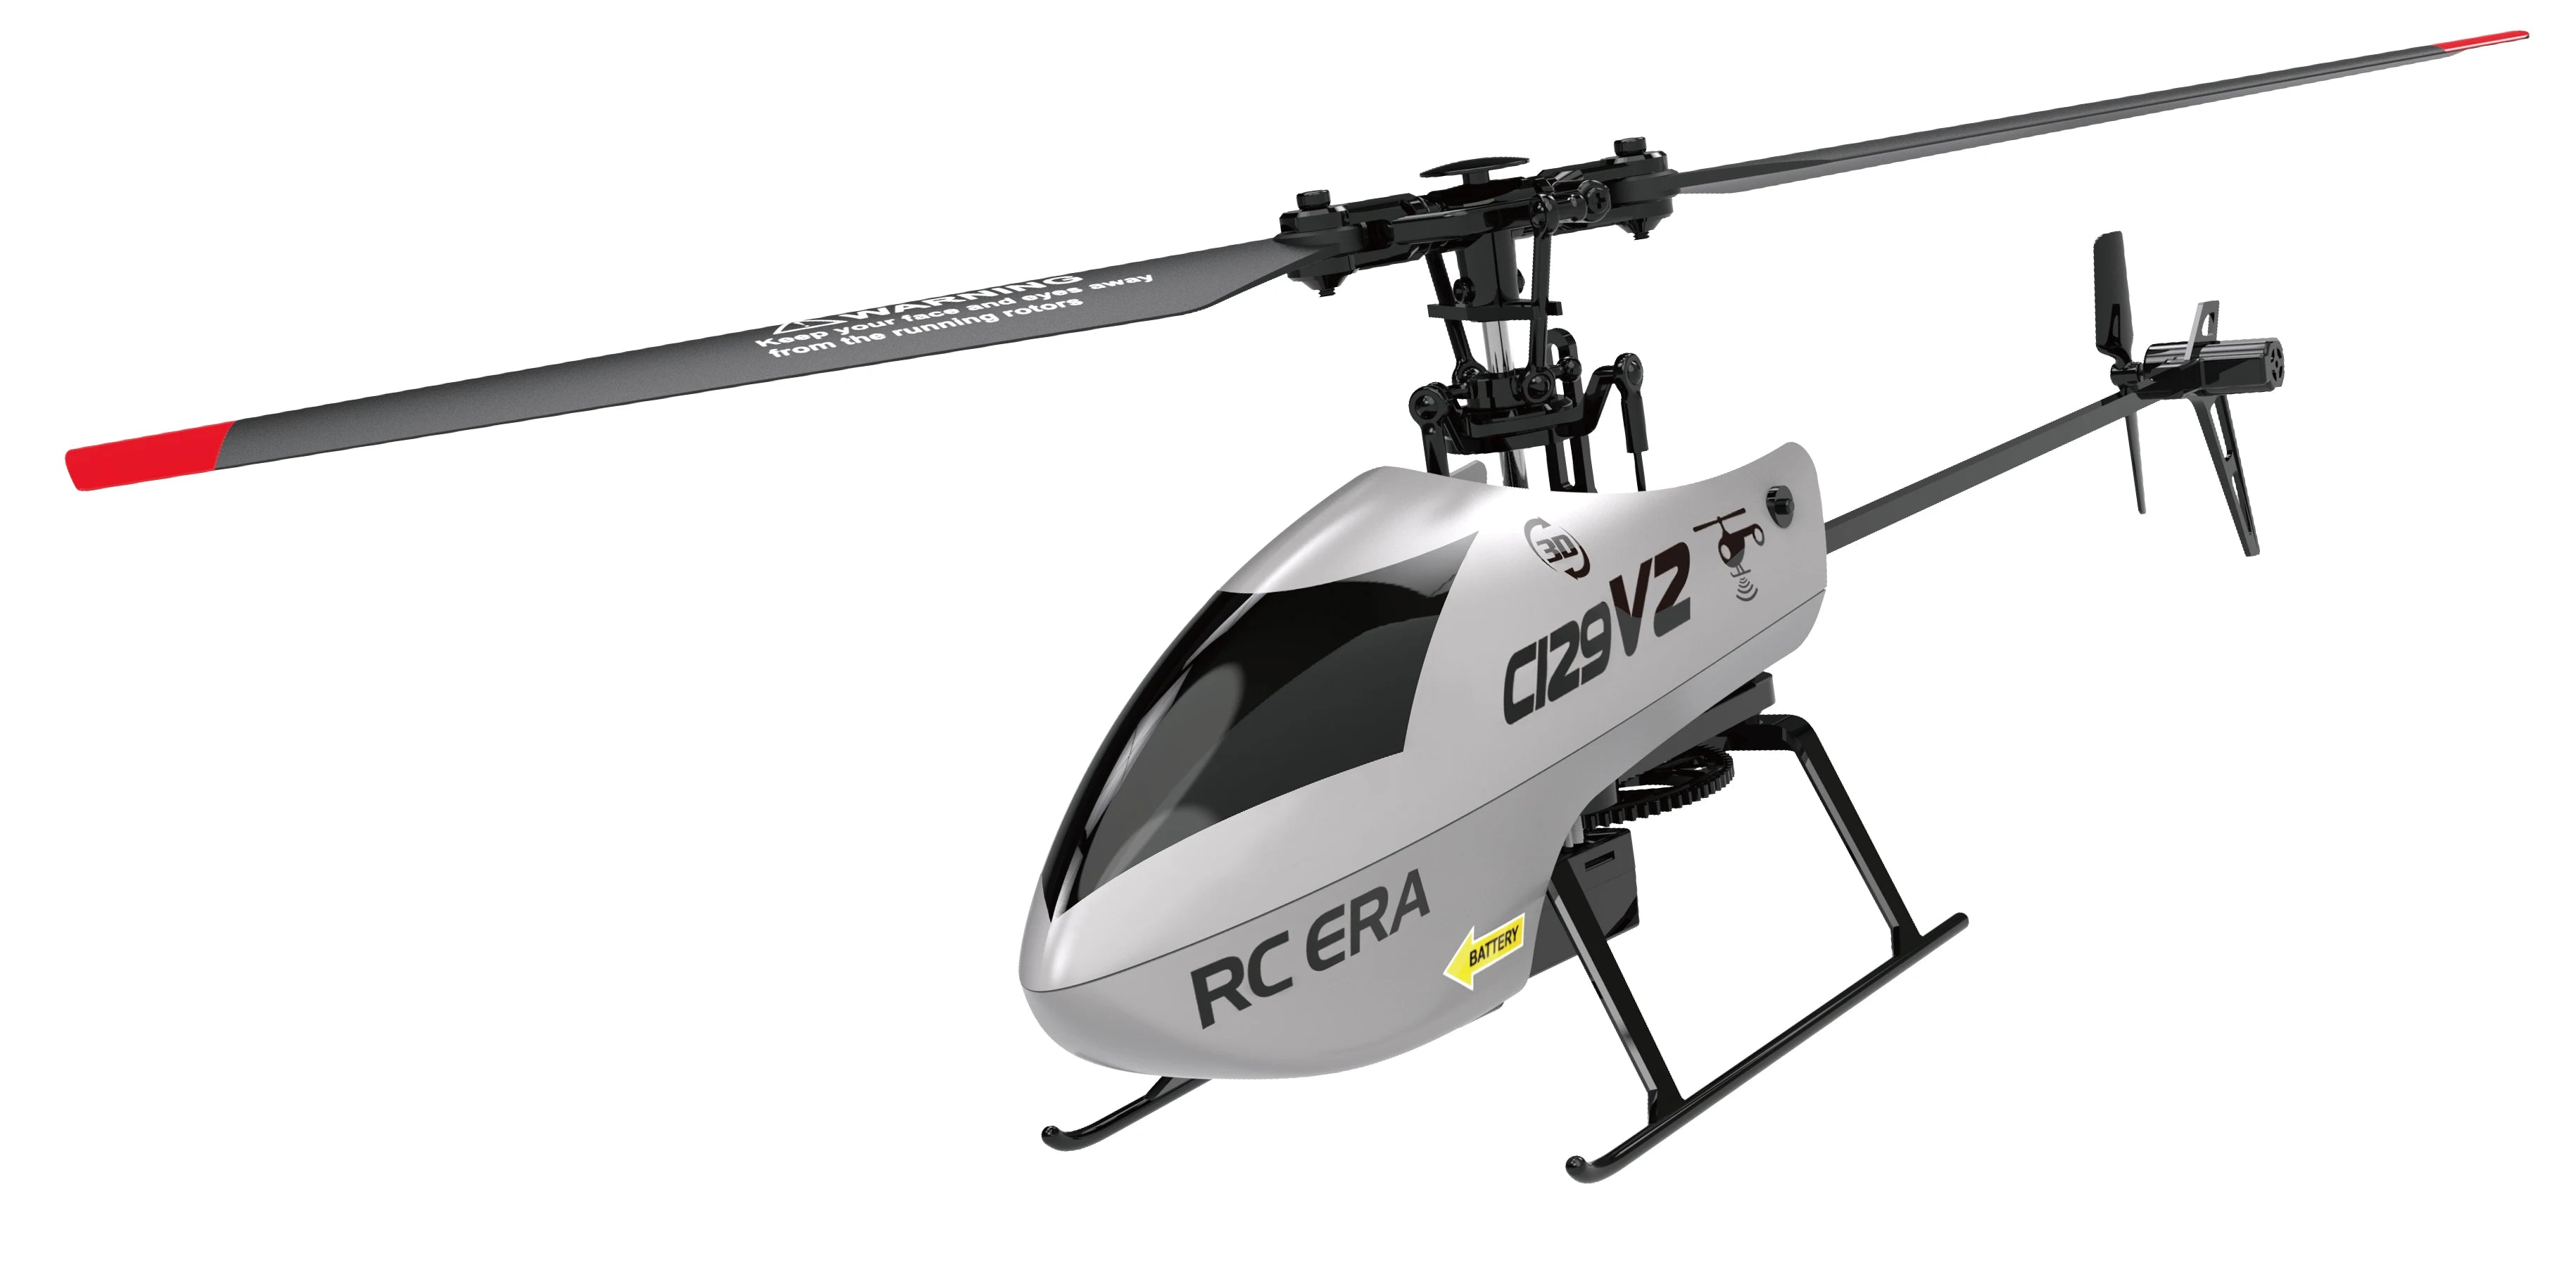 C129 V2 RC Helicopter, the first 4-channel aileron free 360 ° roll mode makes flying more fun